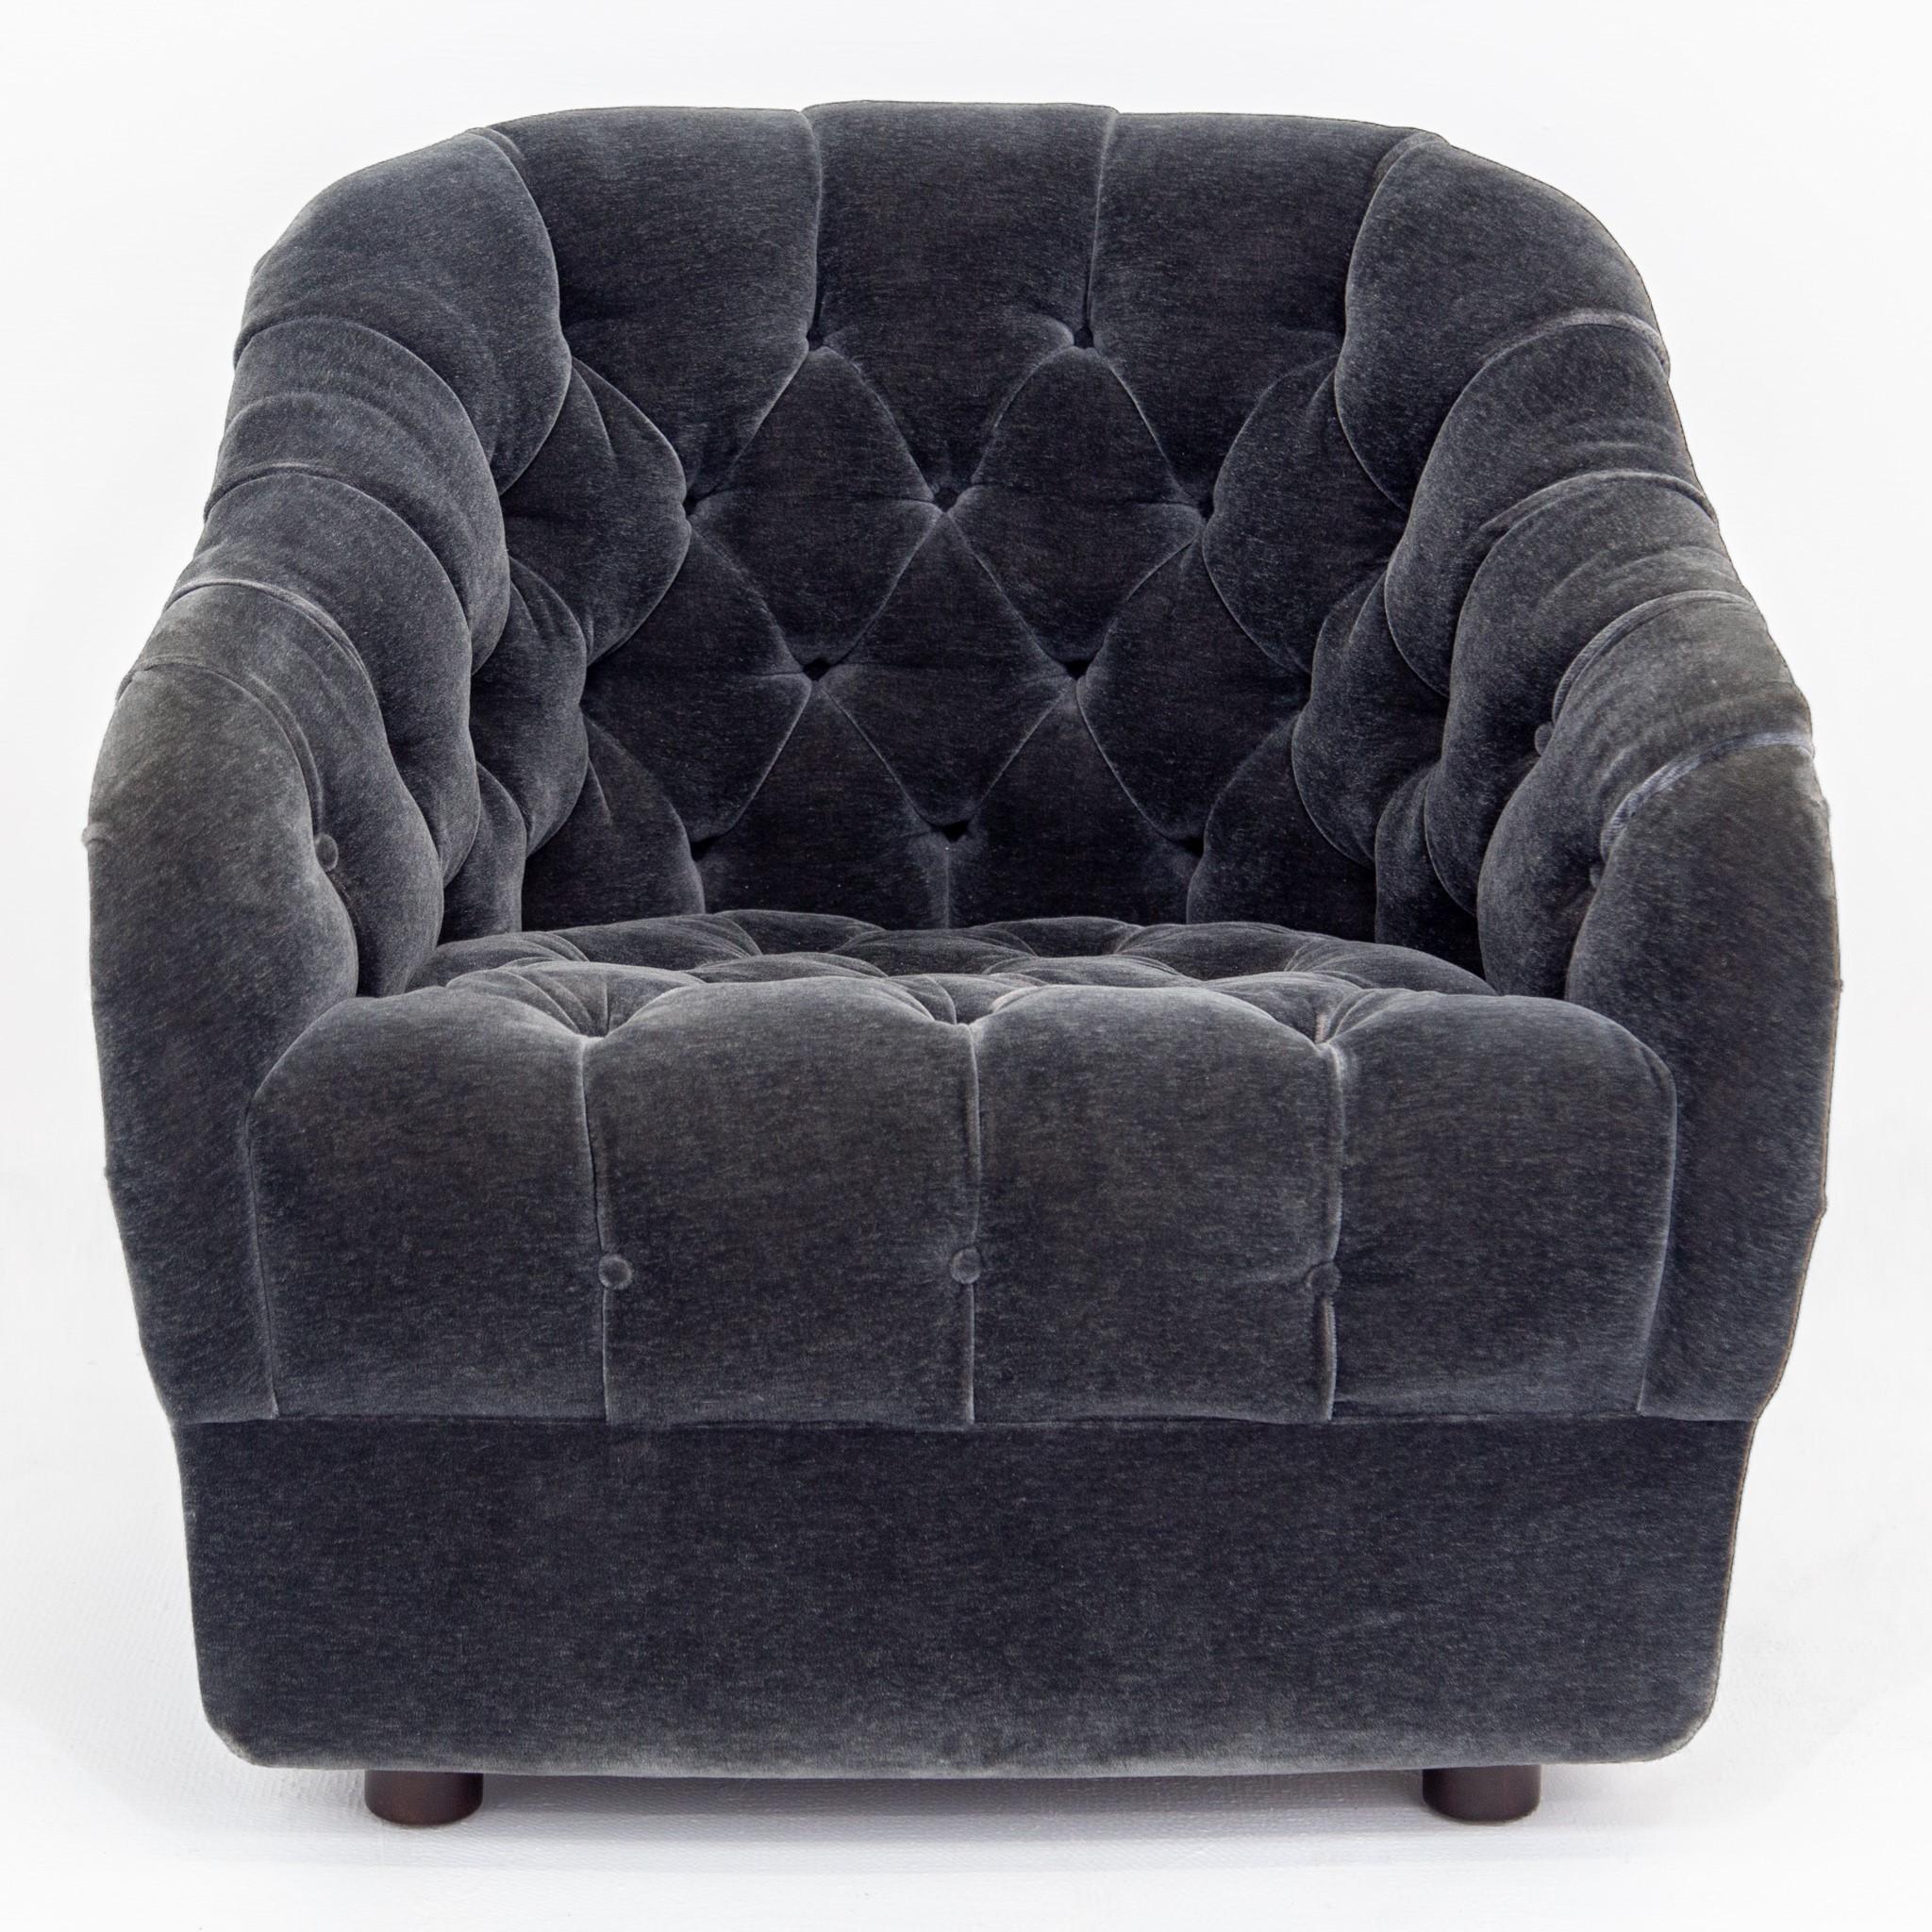 Mid-Century Modern barrel back lounge/club chair with original dark gray deep button tufted velvet upholstery. Designed by Ward Bennett for Brickel Associates with labels attached, dated 1987. Sits on four short cylindrical walnut feet. Extremely